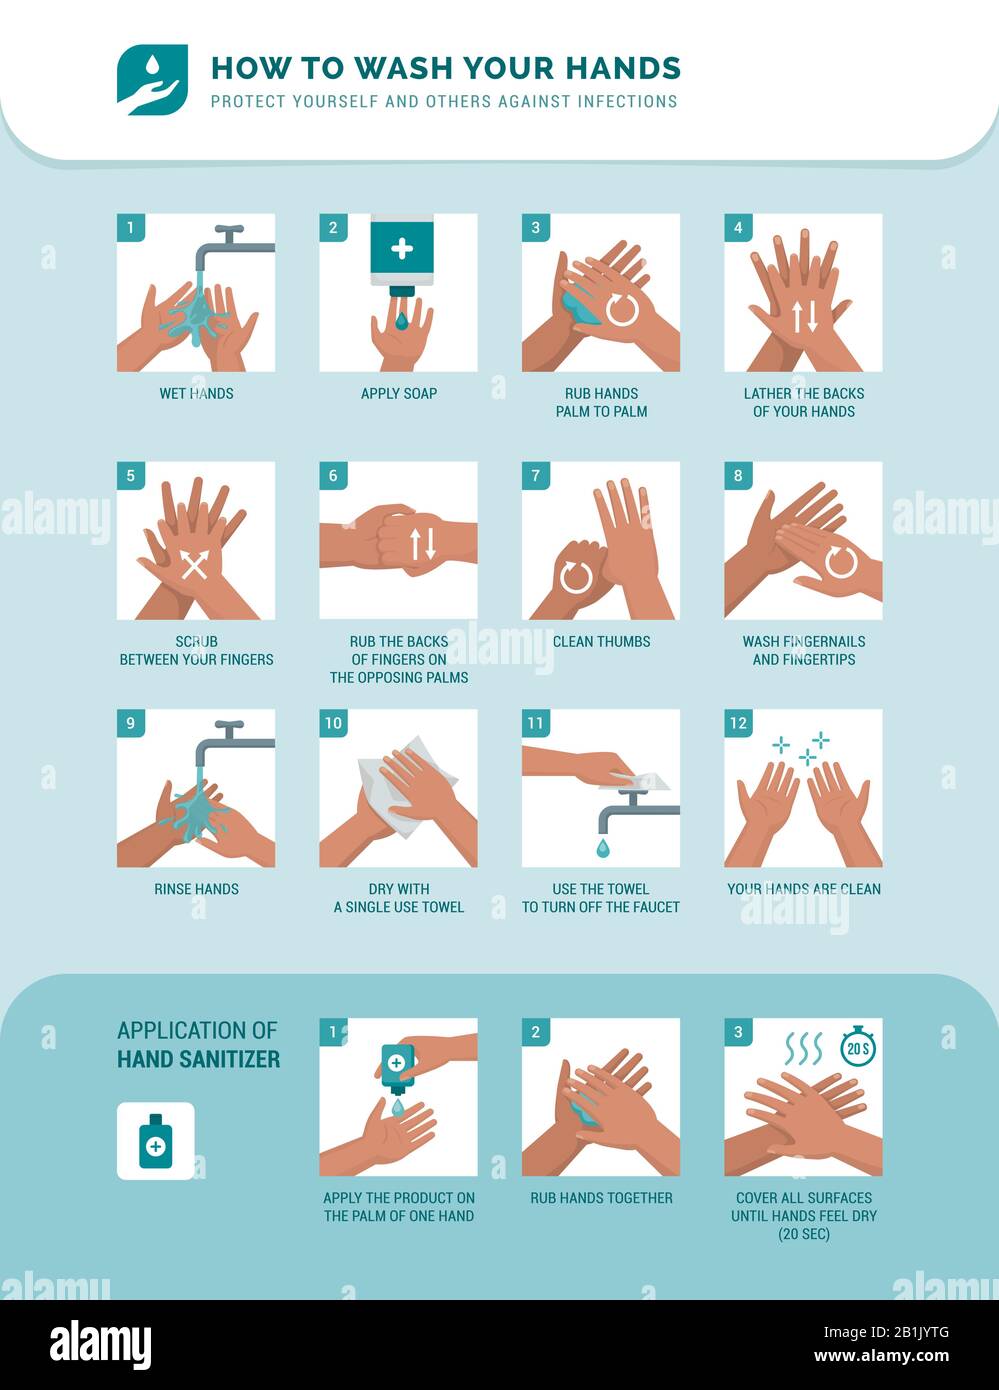 Personal hygiene, disease prevention and healthcare educational infographic: how to wash your hands properly step by step and how to use hand sanitize Stock Vector